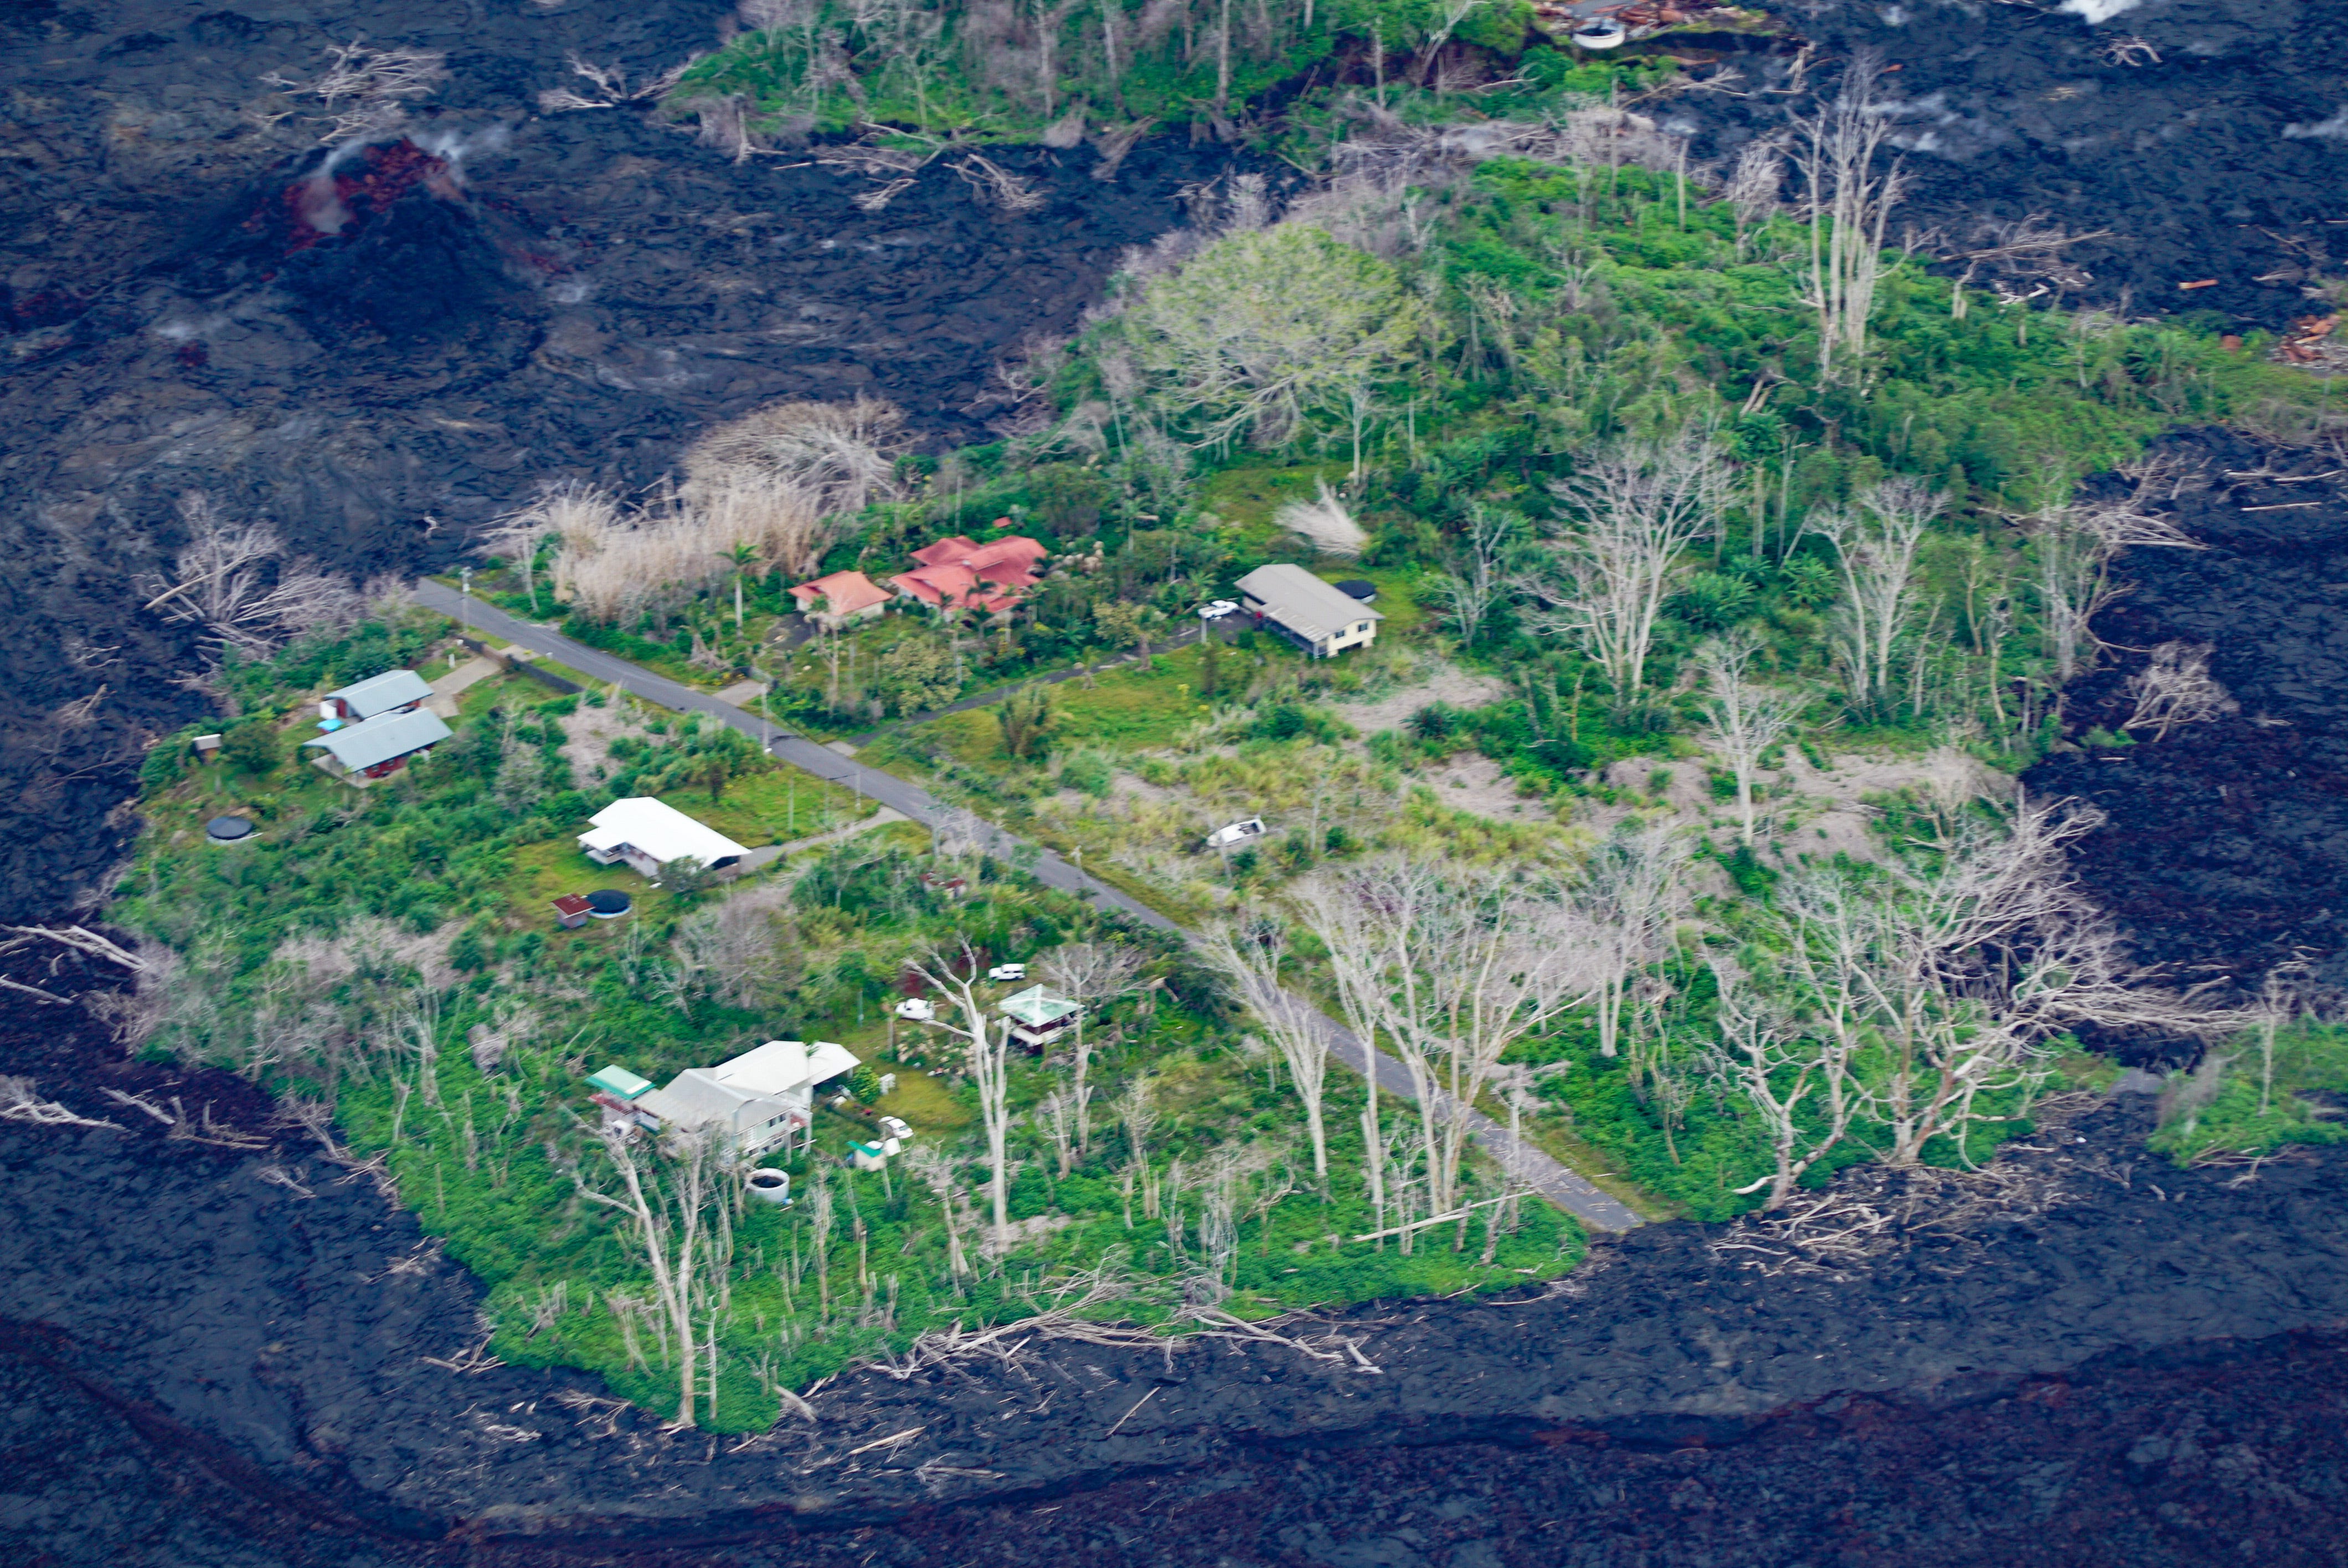 An island of green sits amidst the 2018 lava flow on Hawaii's Big Island. Many residents of islands like this one are frustrated county officials have not rebuilt the roads to their homes yet.